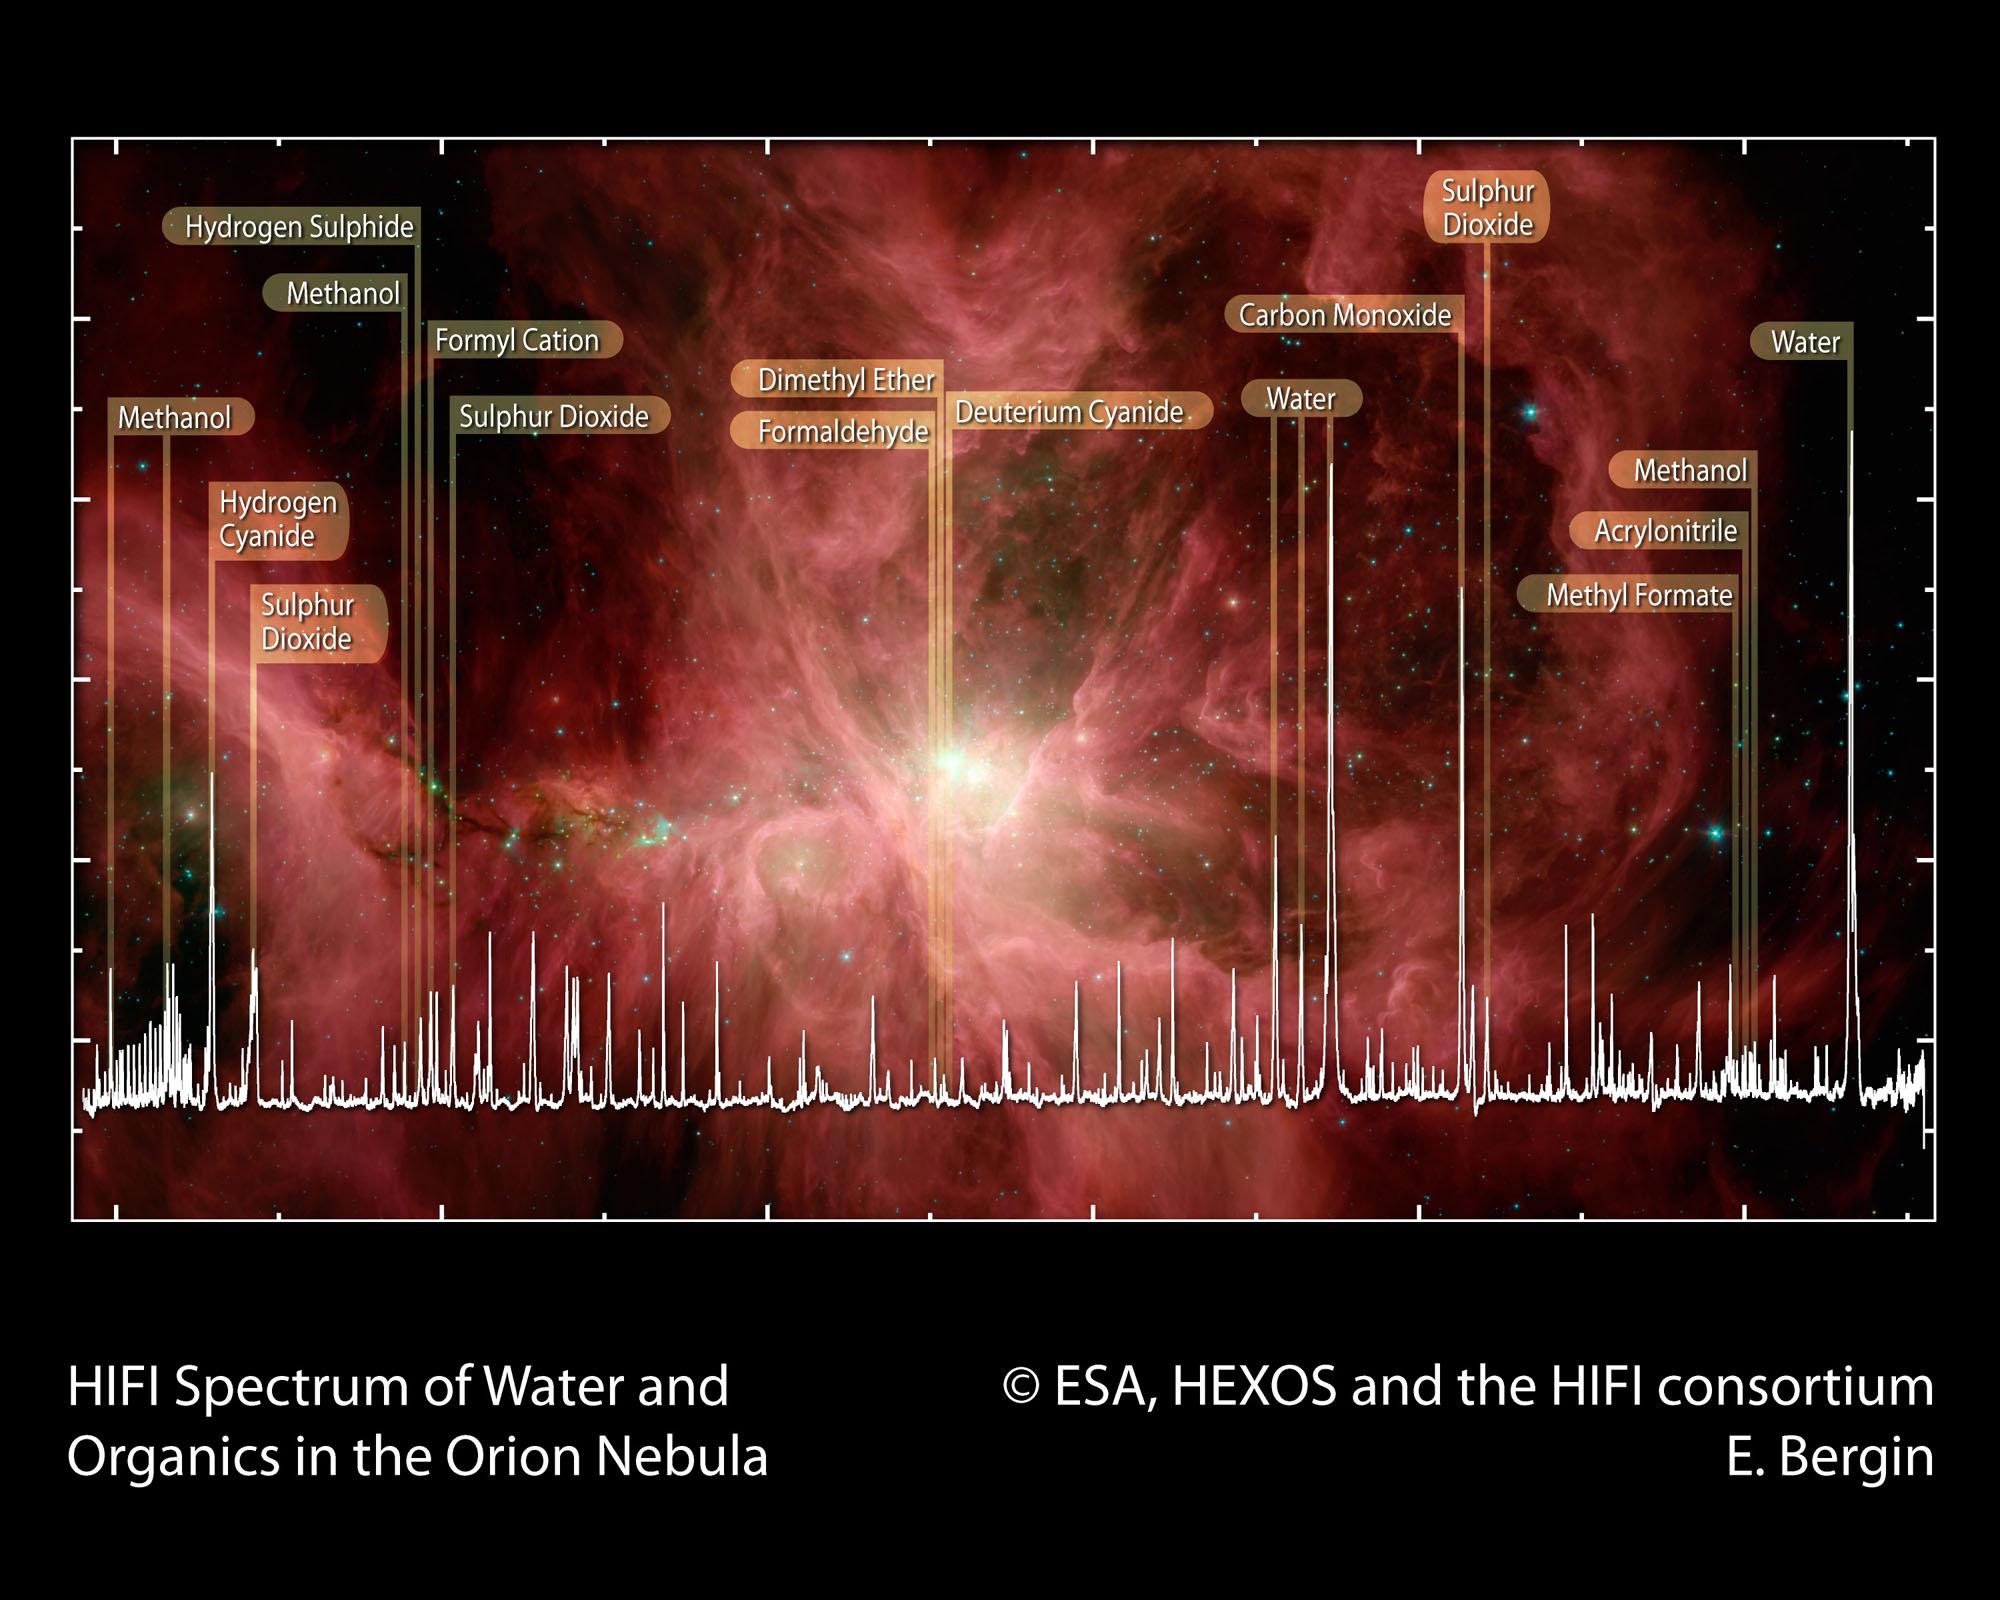 Early Science Demonstration Phase HIFI spectral scan towards the Orion nebula region. Multiple LO settings were used to obtain a complete spectrum across the available frequency range of the whole of a HIFI subband. The combined dual sideband spectra were deconvolved to provide the single sideband spectrum shown.